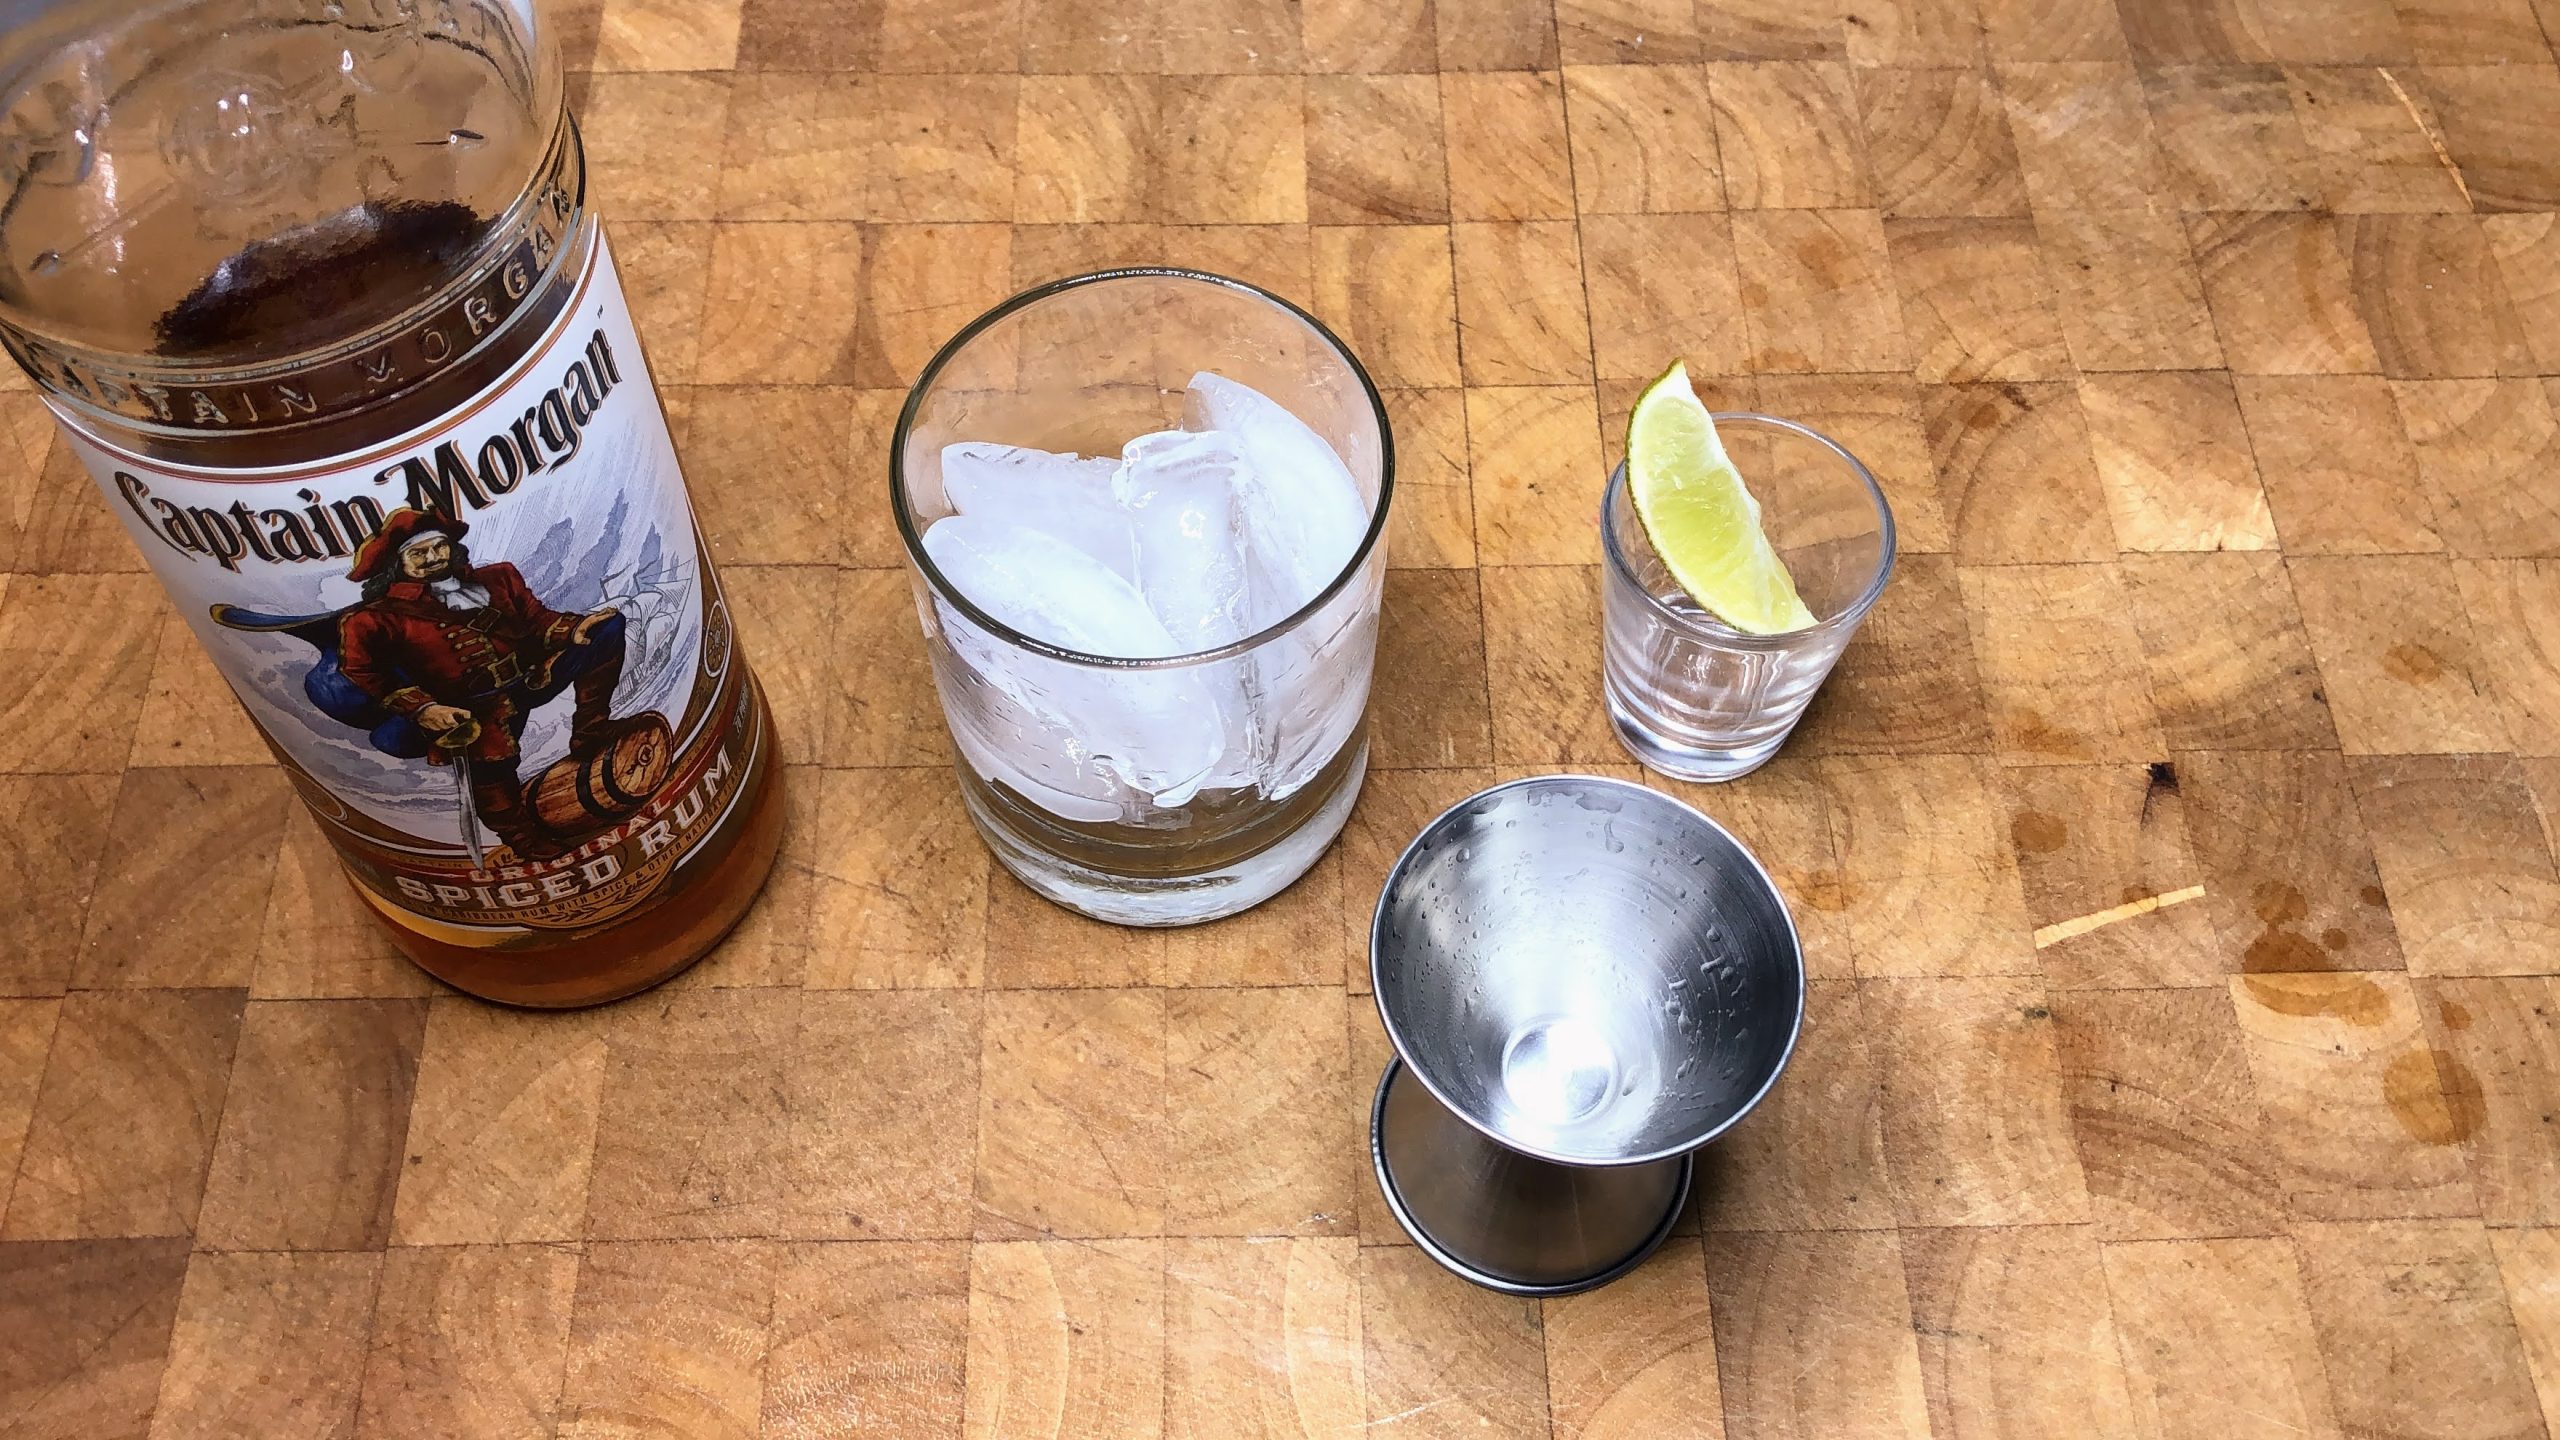 Bottle of spiced rum next to rocks glass with ice, lime wedge and a jigger.